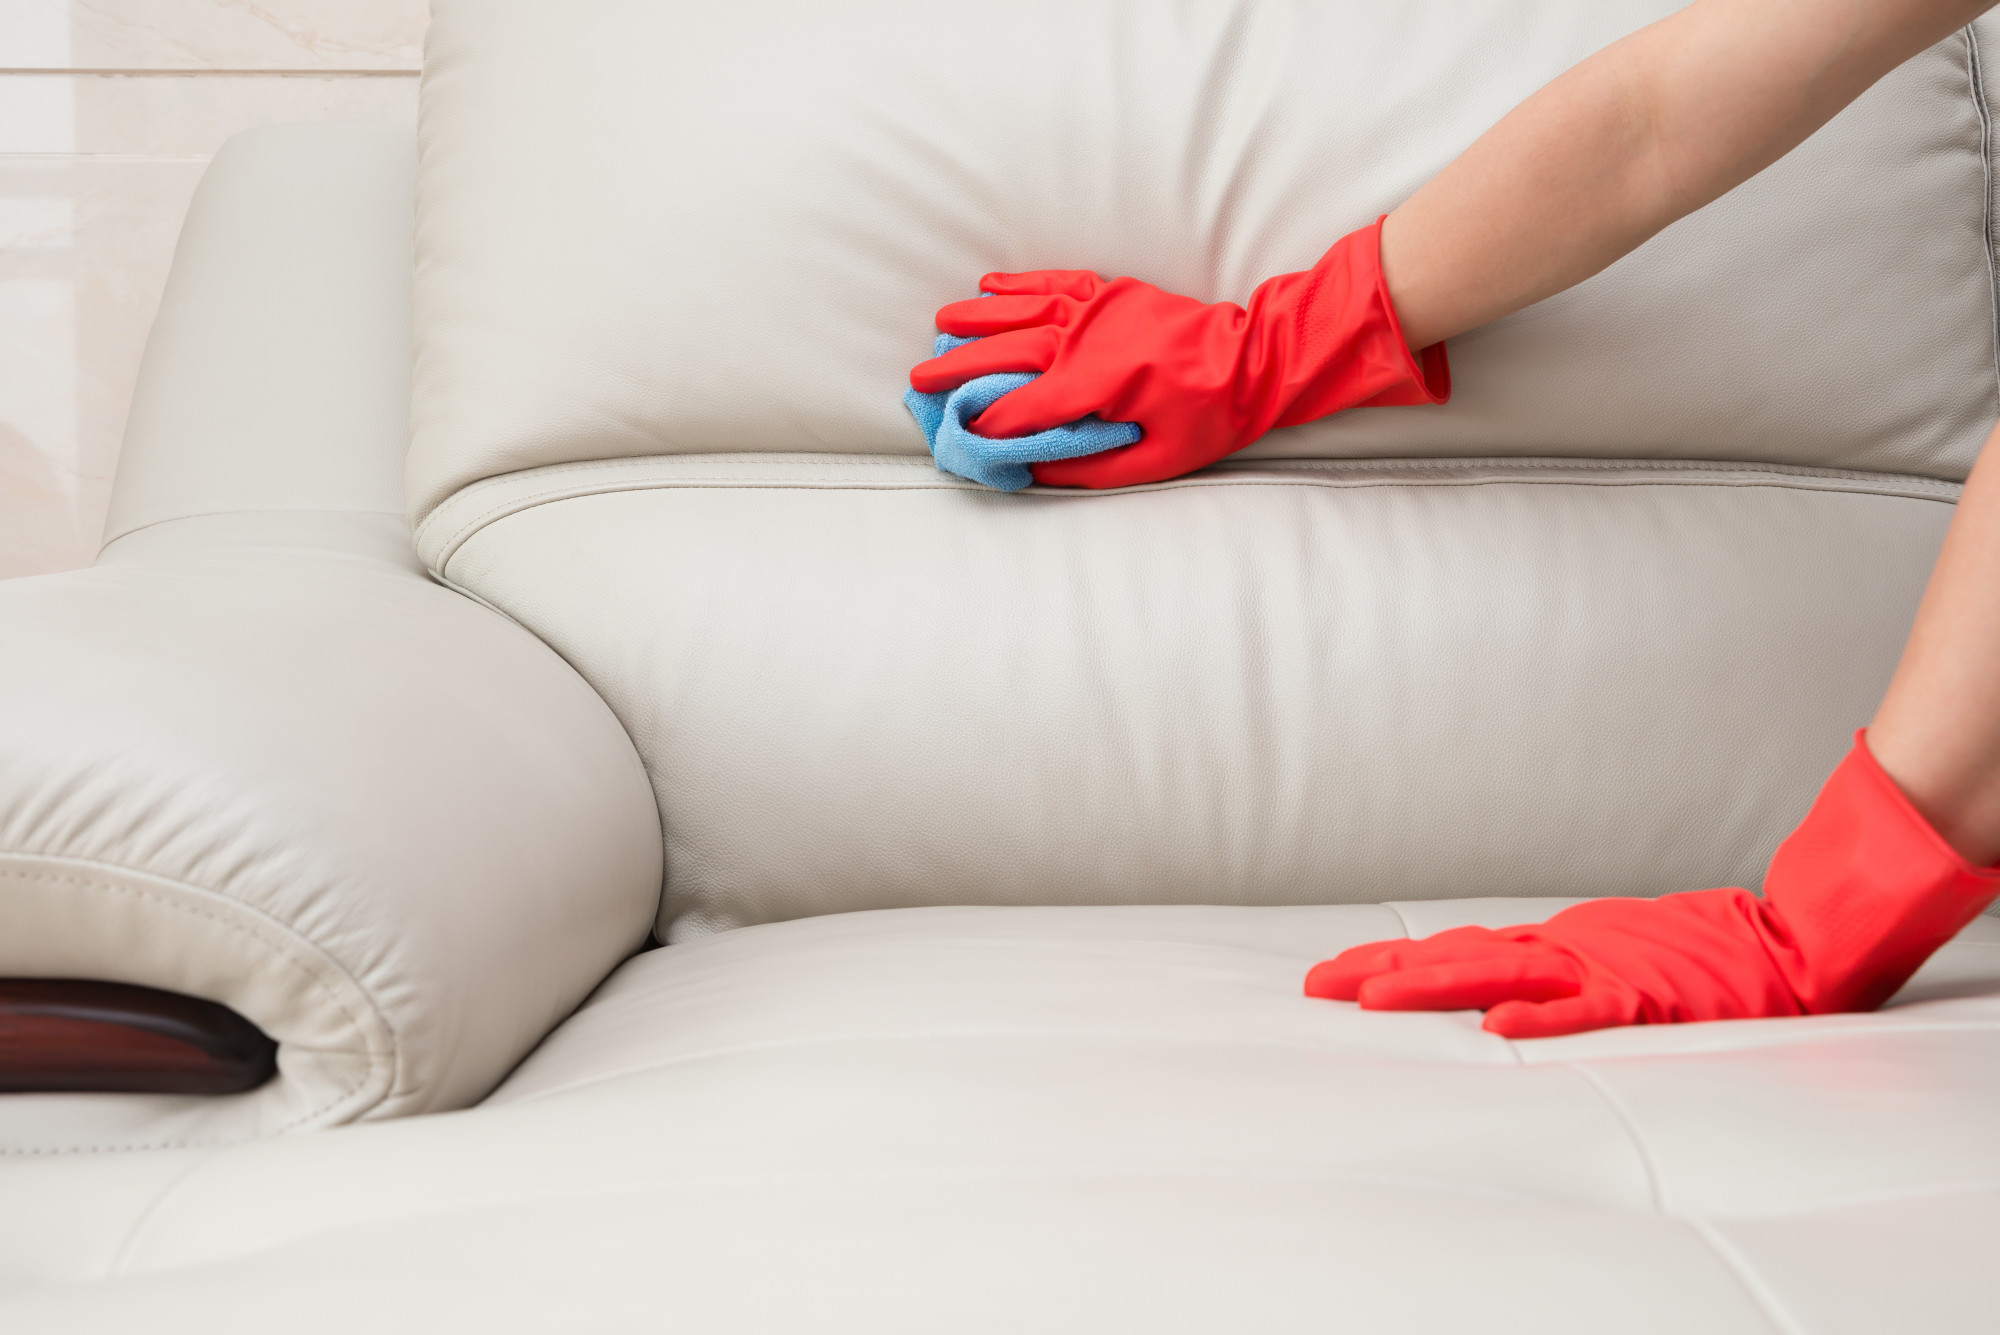 How To Clean Mold off Furniture